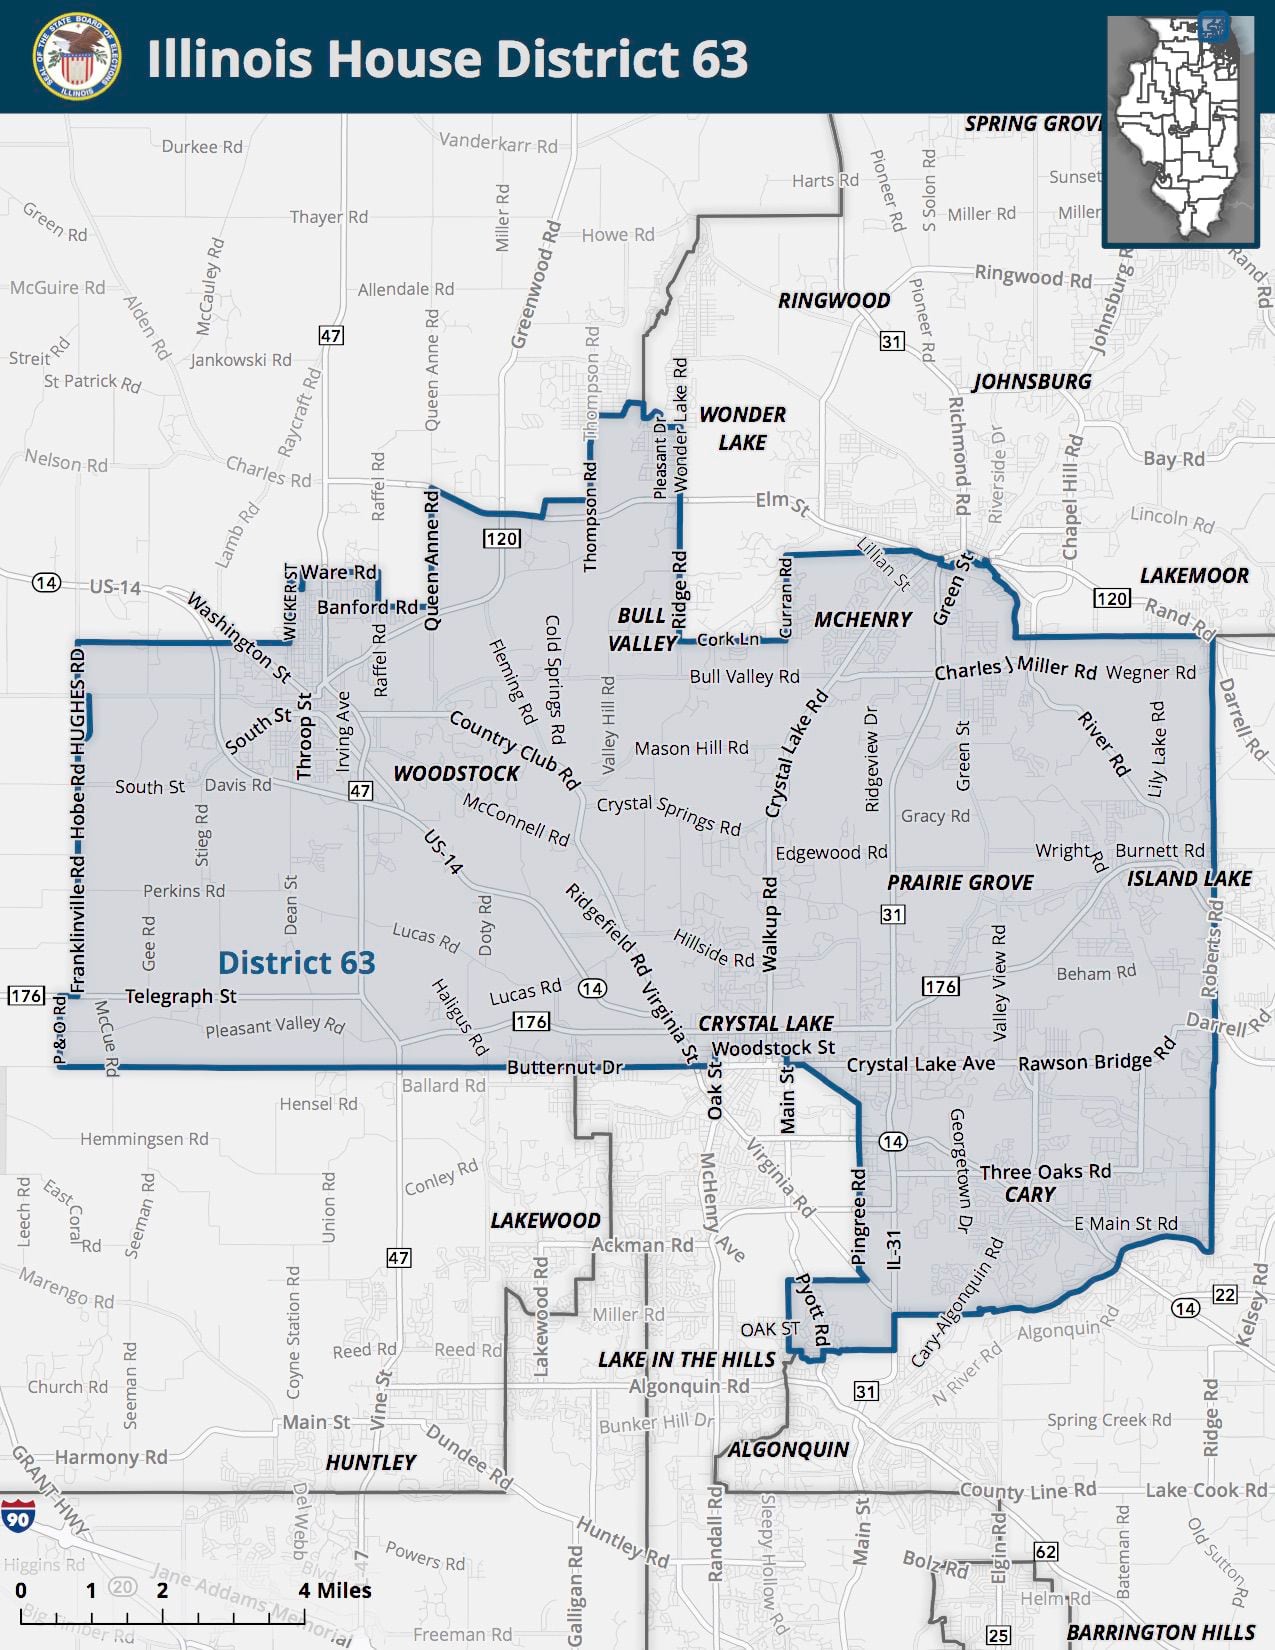 Illinois House District 63 encompasses a large central portion of McHenry County stretching from Woodstock to Island Lake, and includes large portions of Cary, Crystal Lake and McHenry.